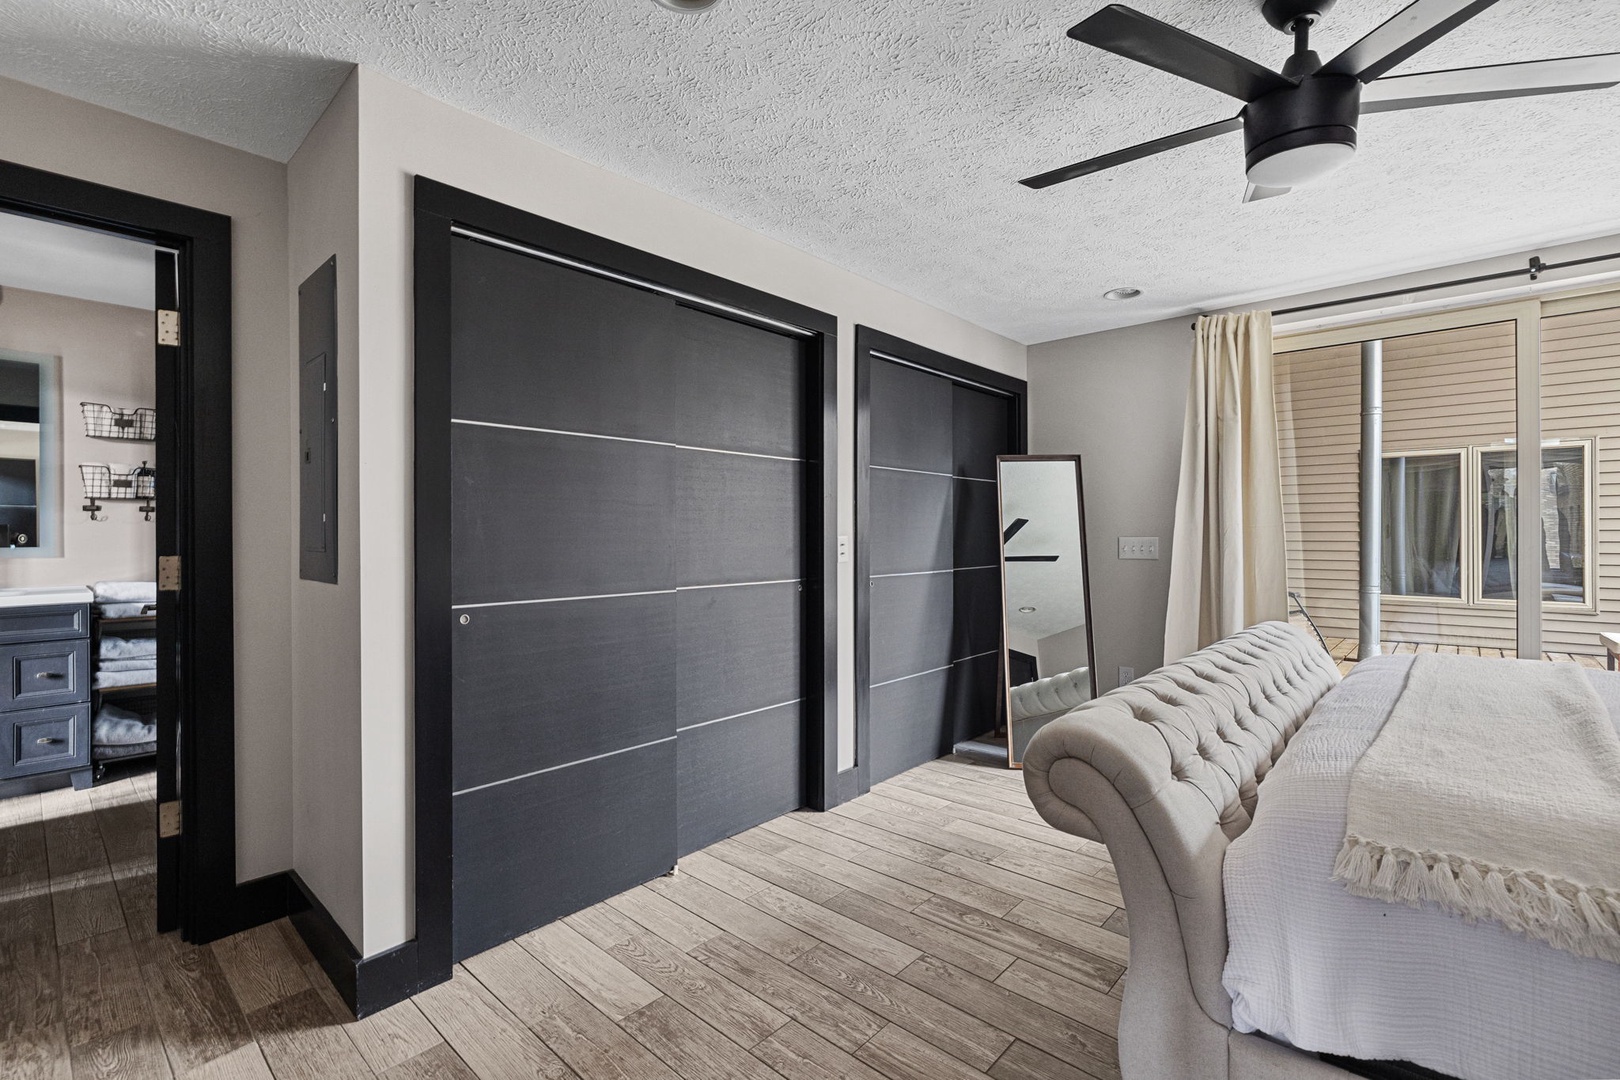 The Master Bedroom features an Ensuite Bathroom - plus lots of closet space.